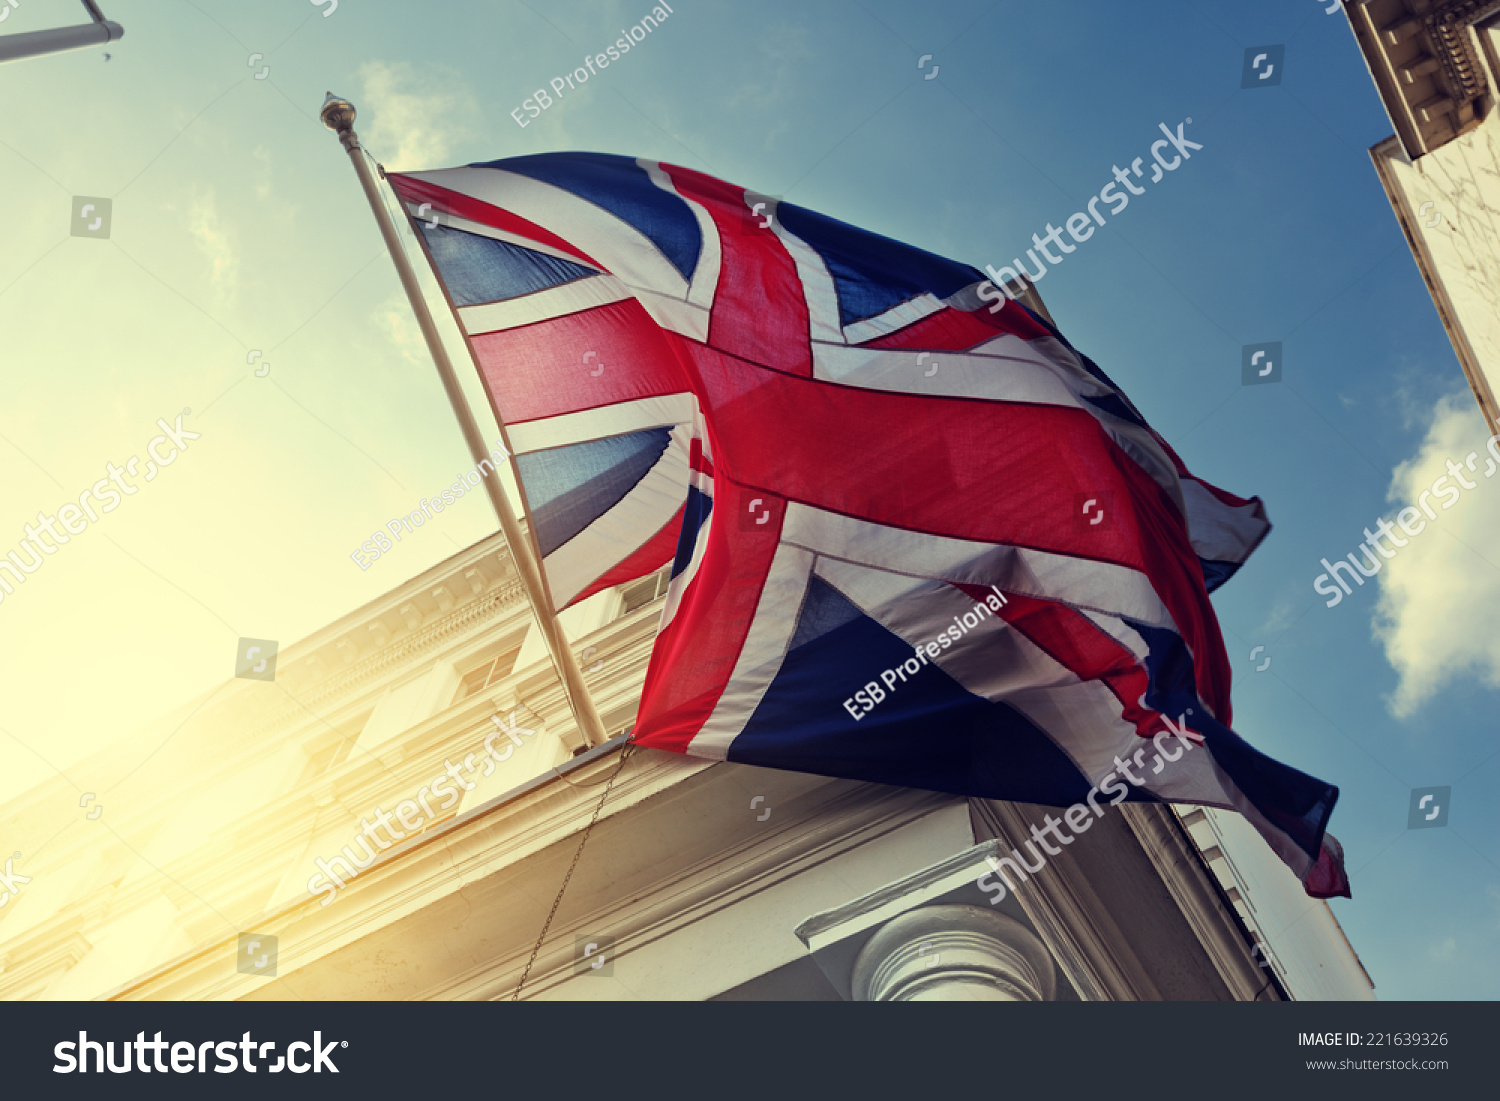 Flag Of Uk On Government Building Stock Photo 221639326 : Shutterstock